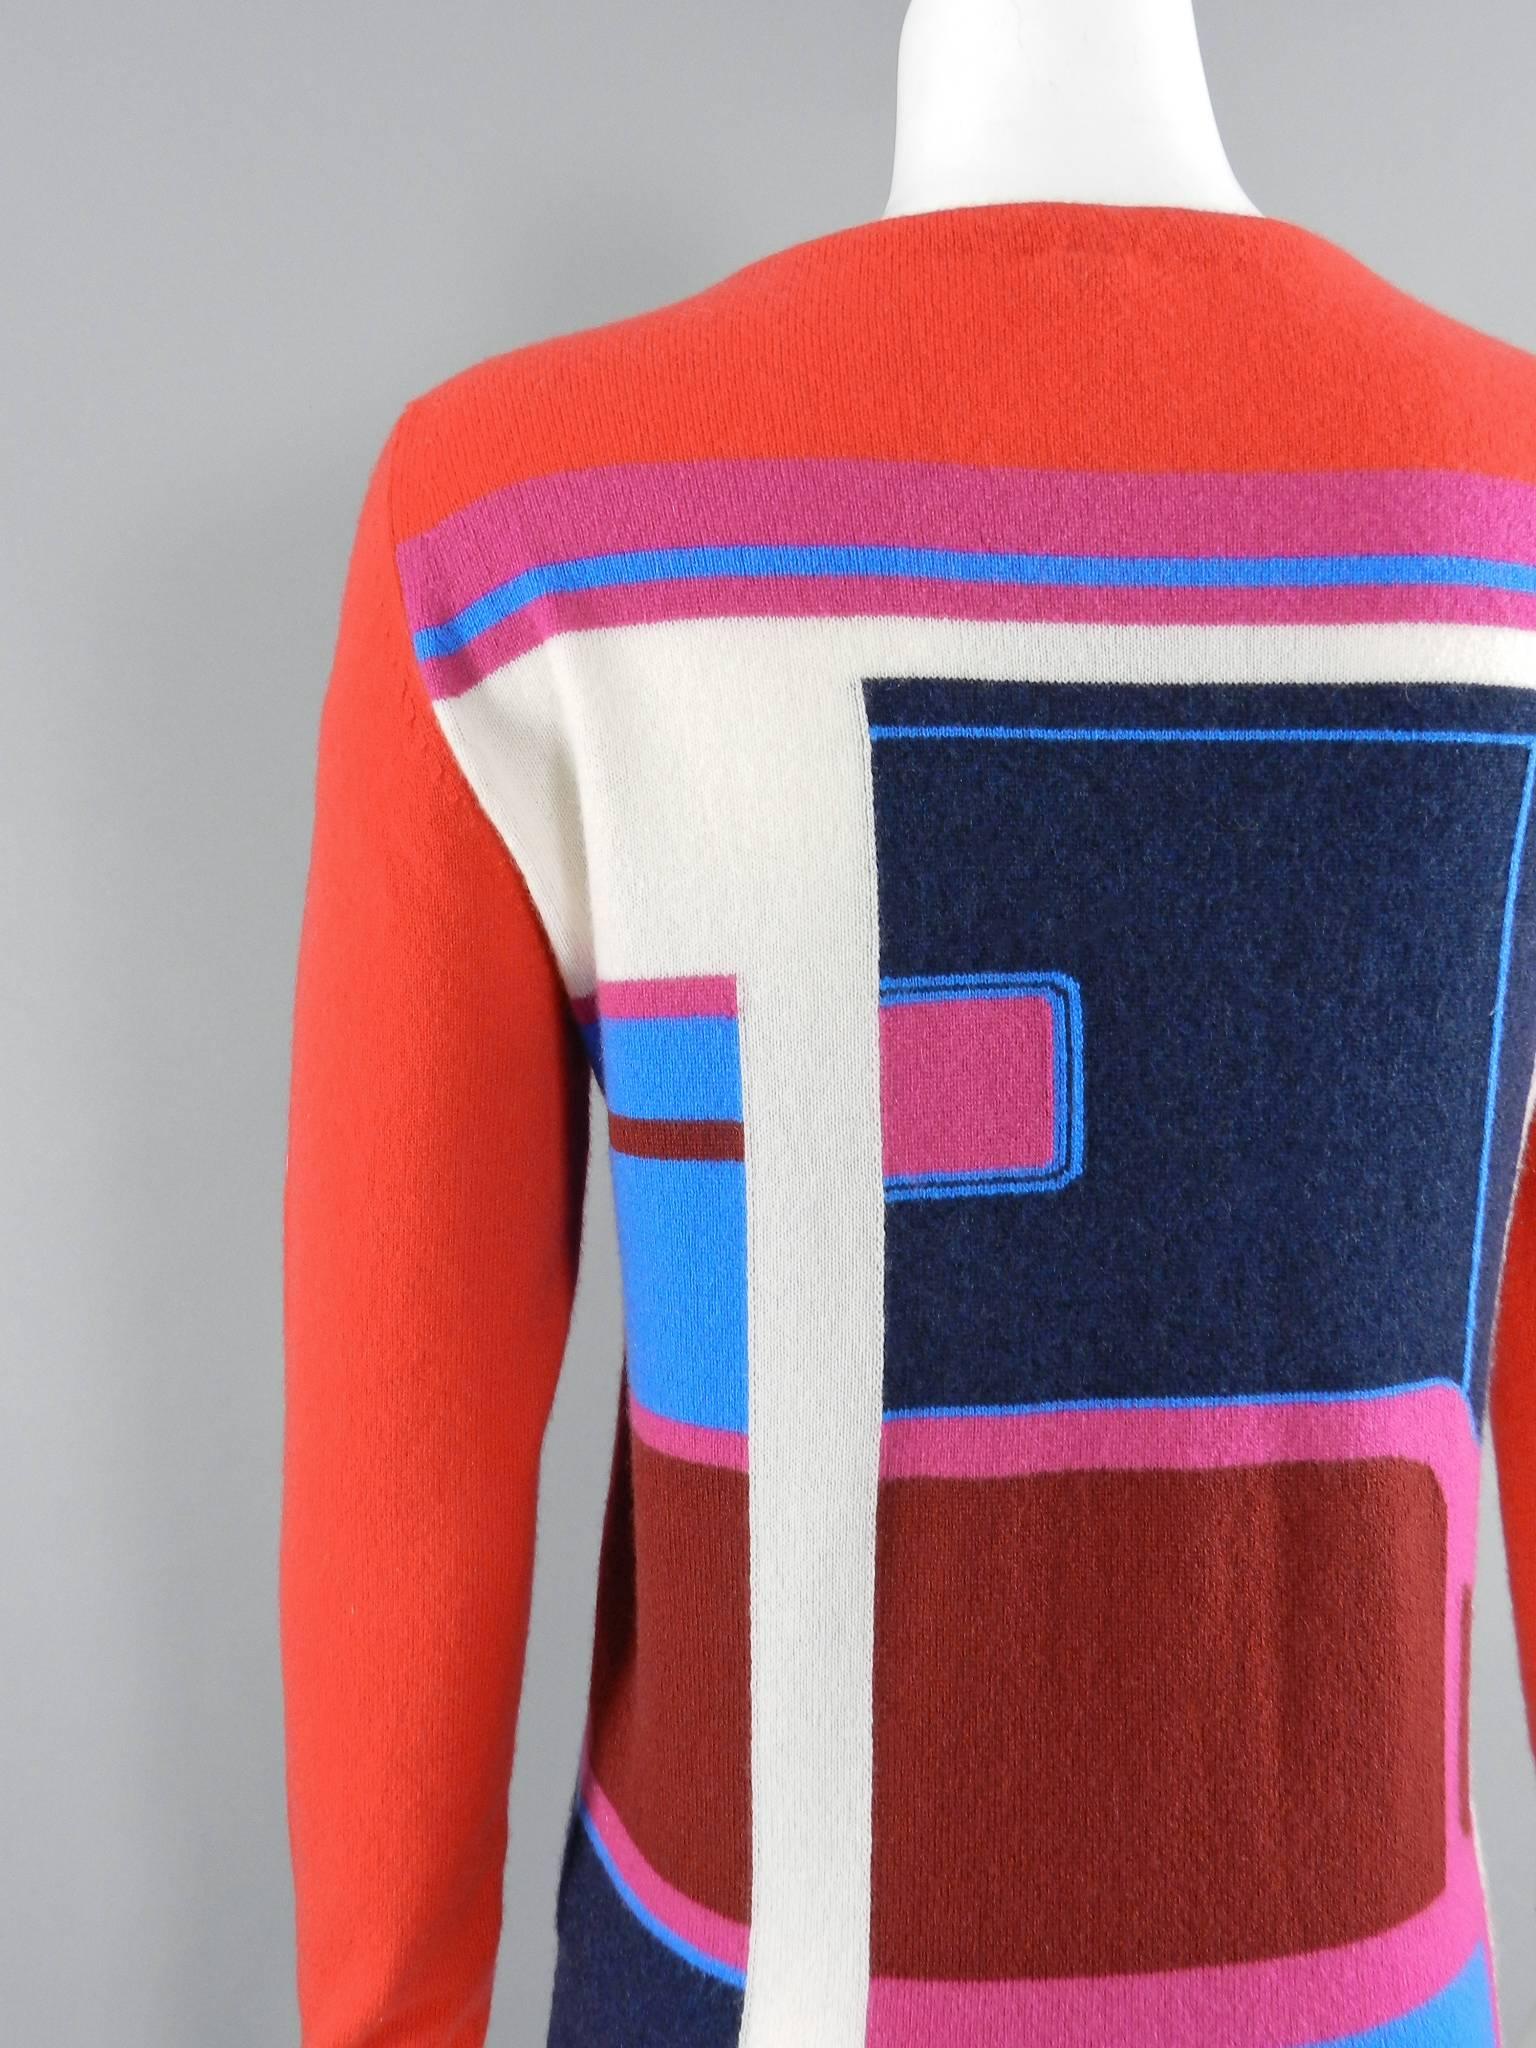 Hermes Red and Blue Color Block Cashmere Sweater.  Graphic design in melon red, blue, navy, burgundy, white, and pink  Tagged FR 36 (USA 4).  To fit 34